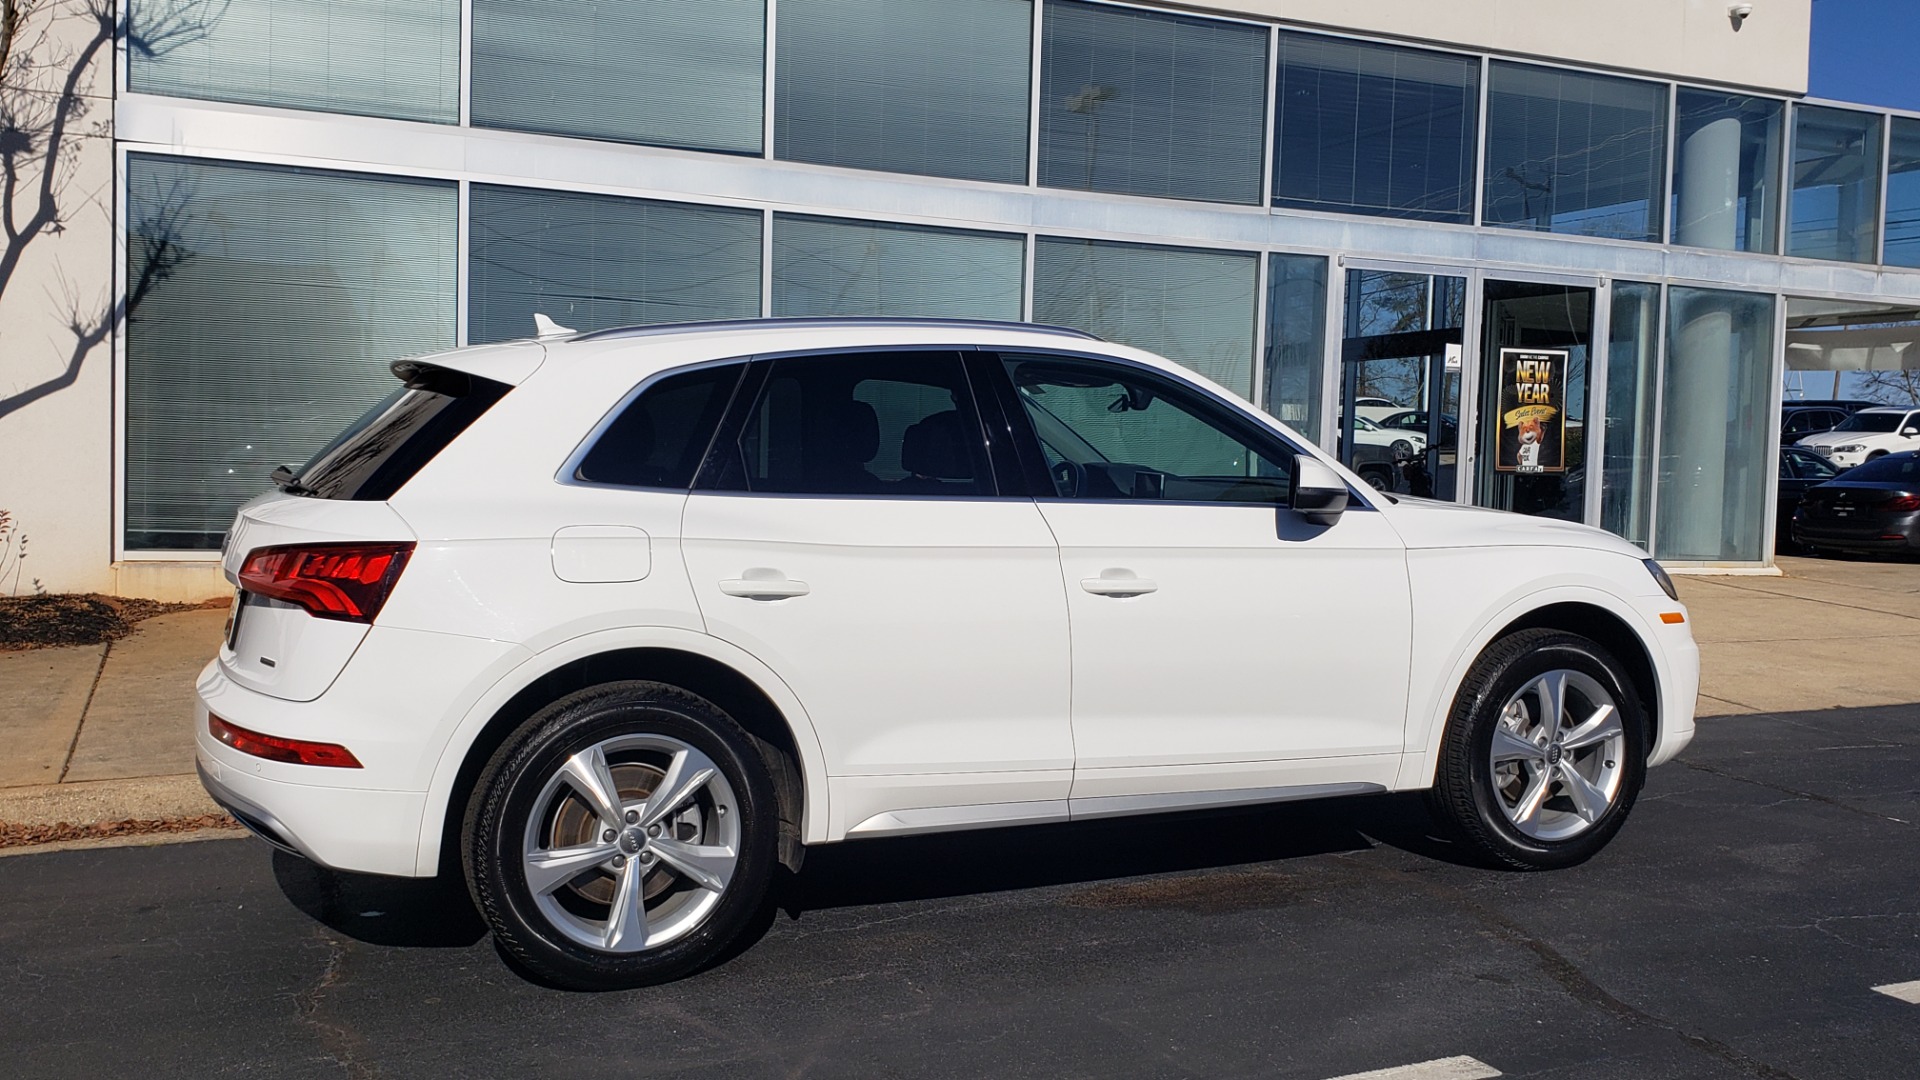 Used 2019 Audi Q5 PREMIUM PLUS 2.0L / AWD / NAV / PANO-ROOF / DRVR ASST / REARVIEW for sale $32,000 at Formula Imports in Charlotte NC 28227 7